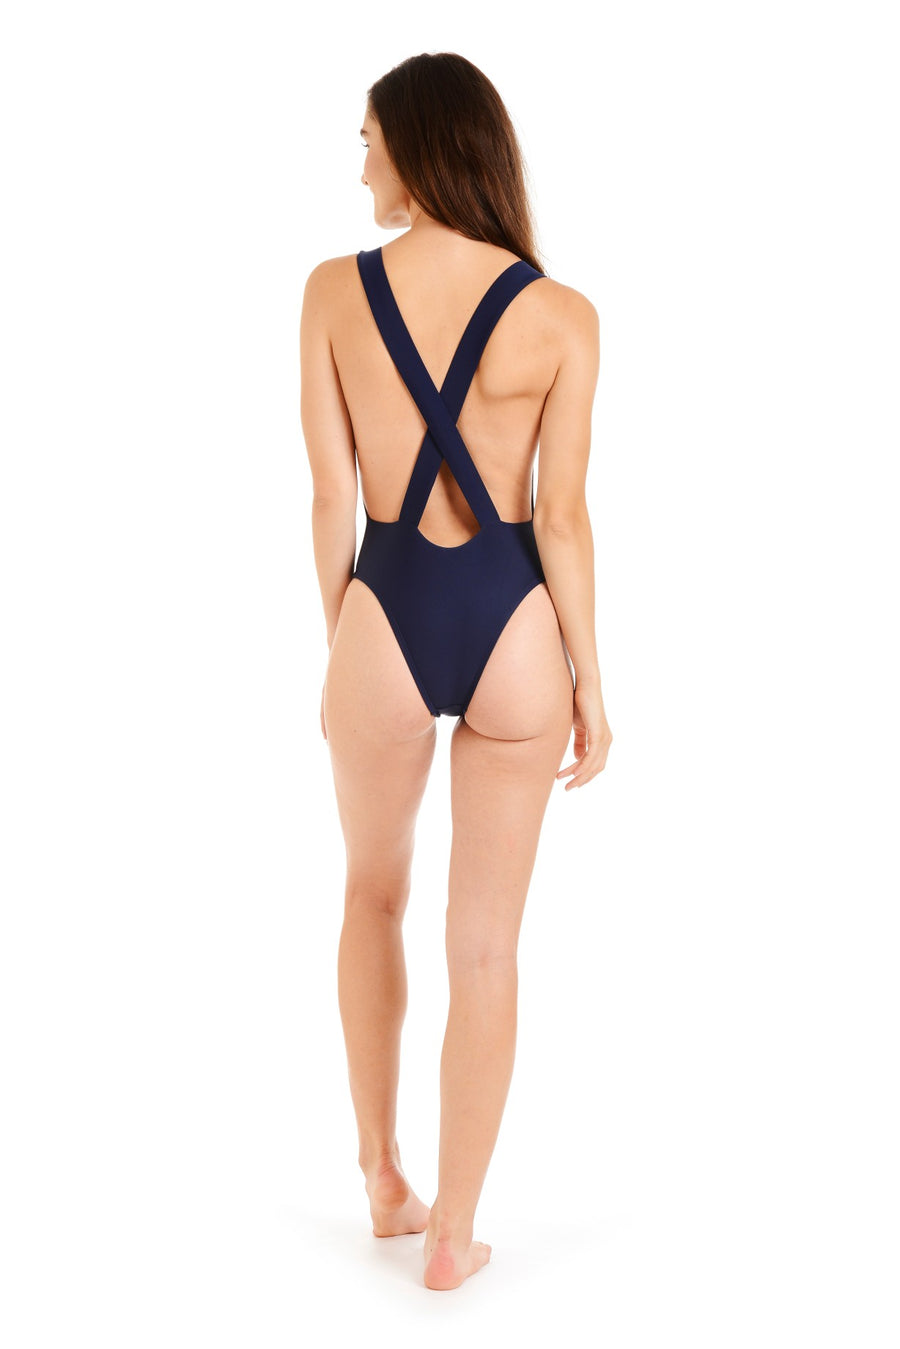 Back view of a woman wearing a navy one-piece swimsuit